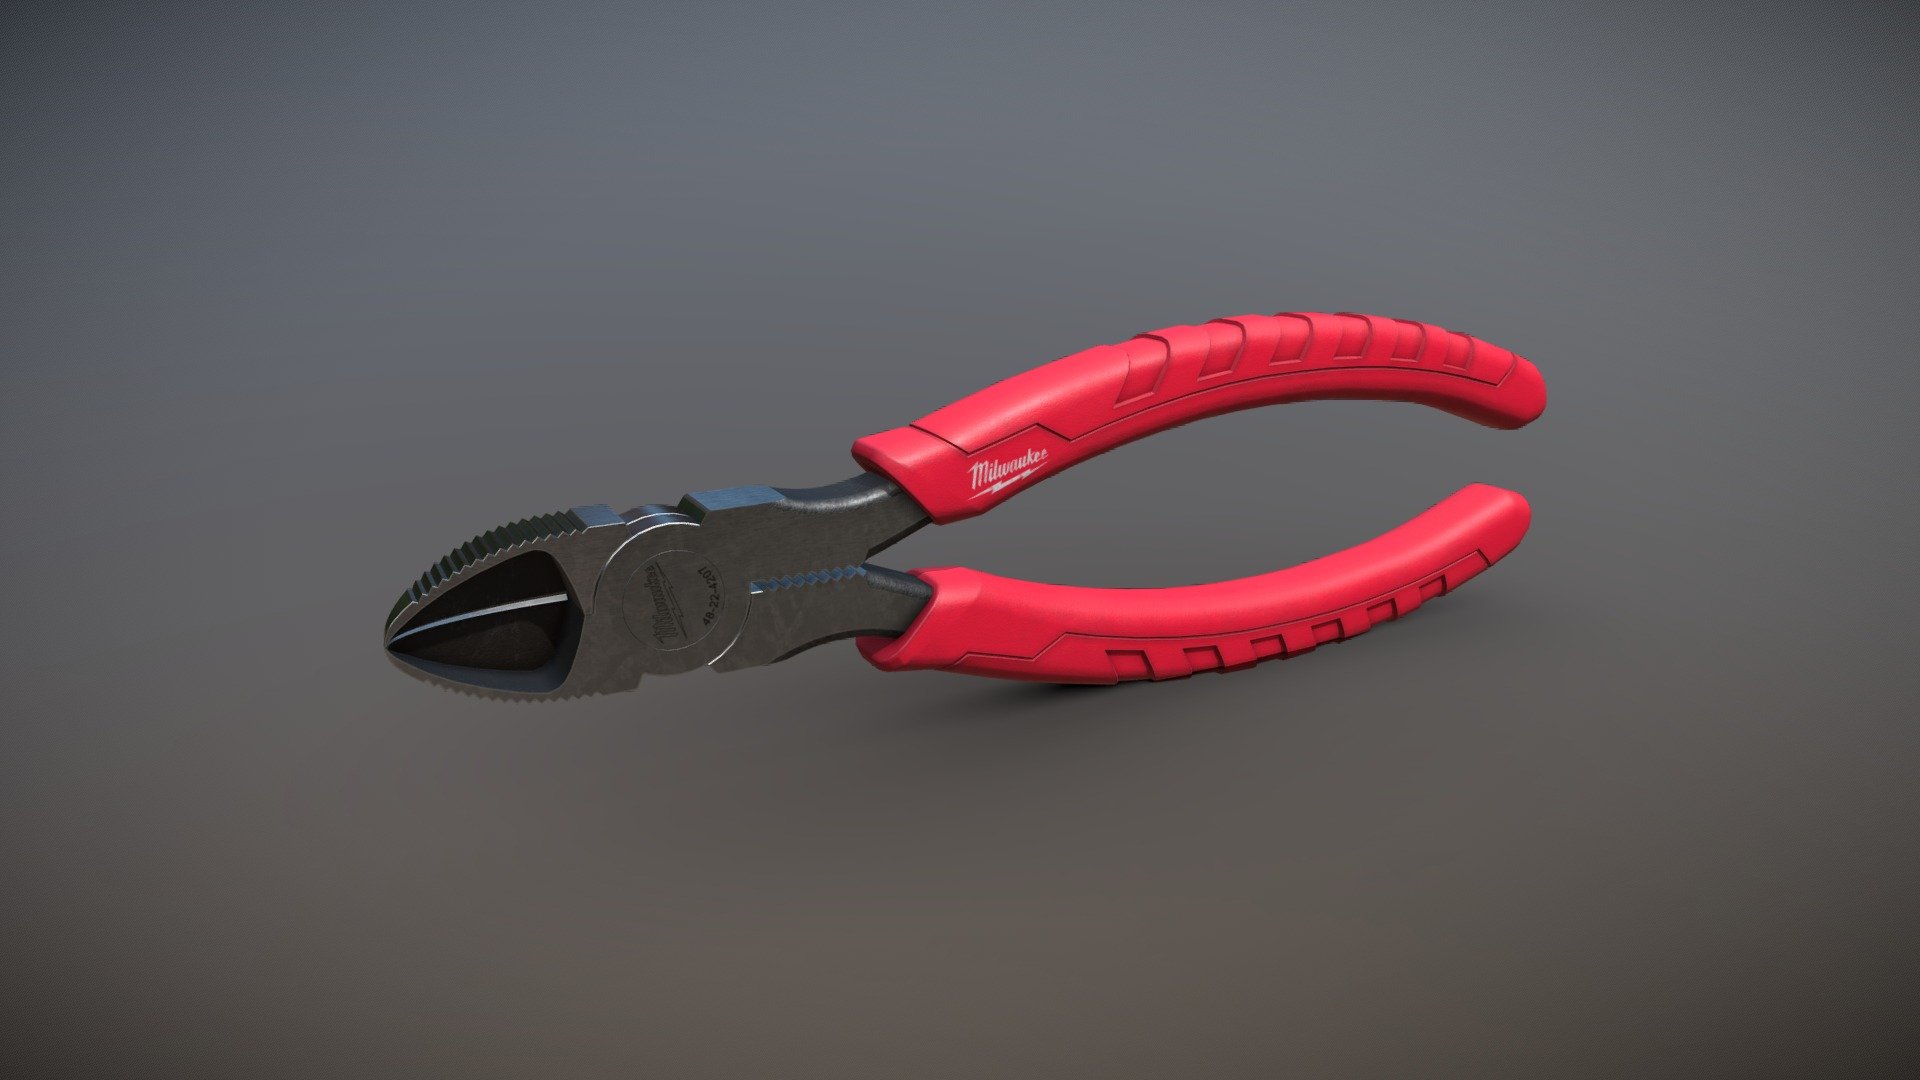 Milwaukee brand side cutter pliers - primarily used to cut wire 3d model